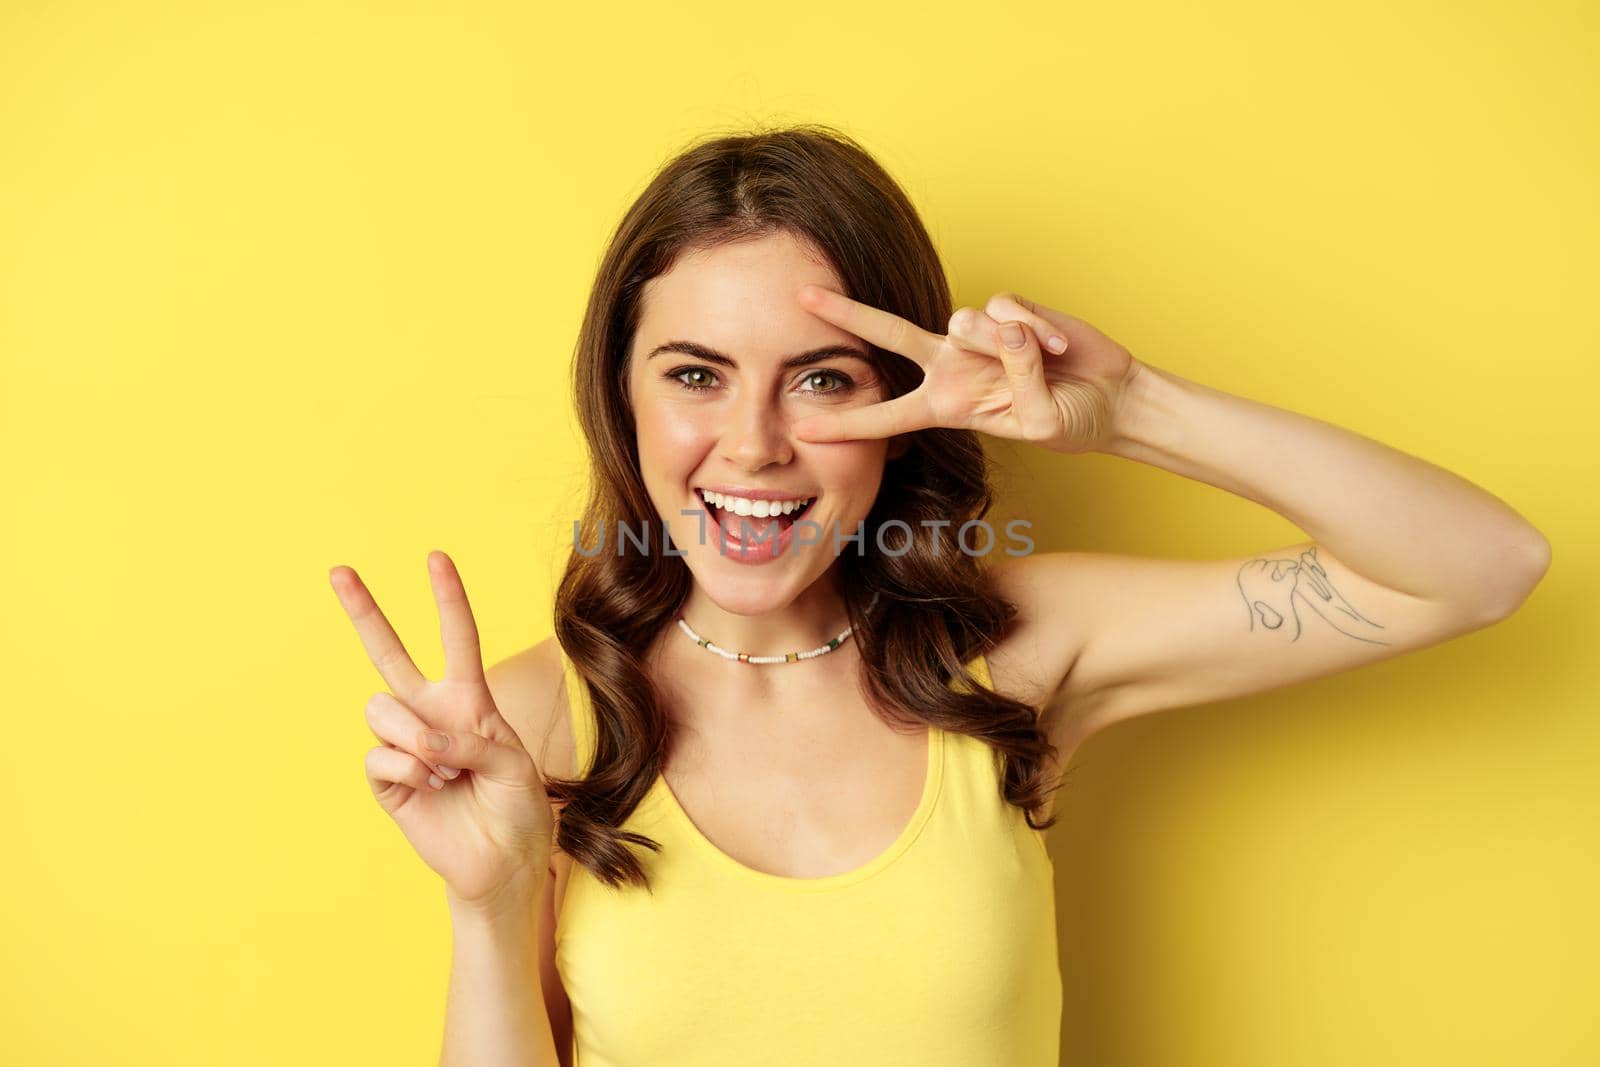 Close up portrait of stylish happy girl, showing peace sign and smiling, posing against yellow background. Copy space